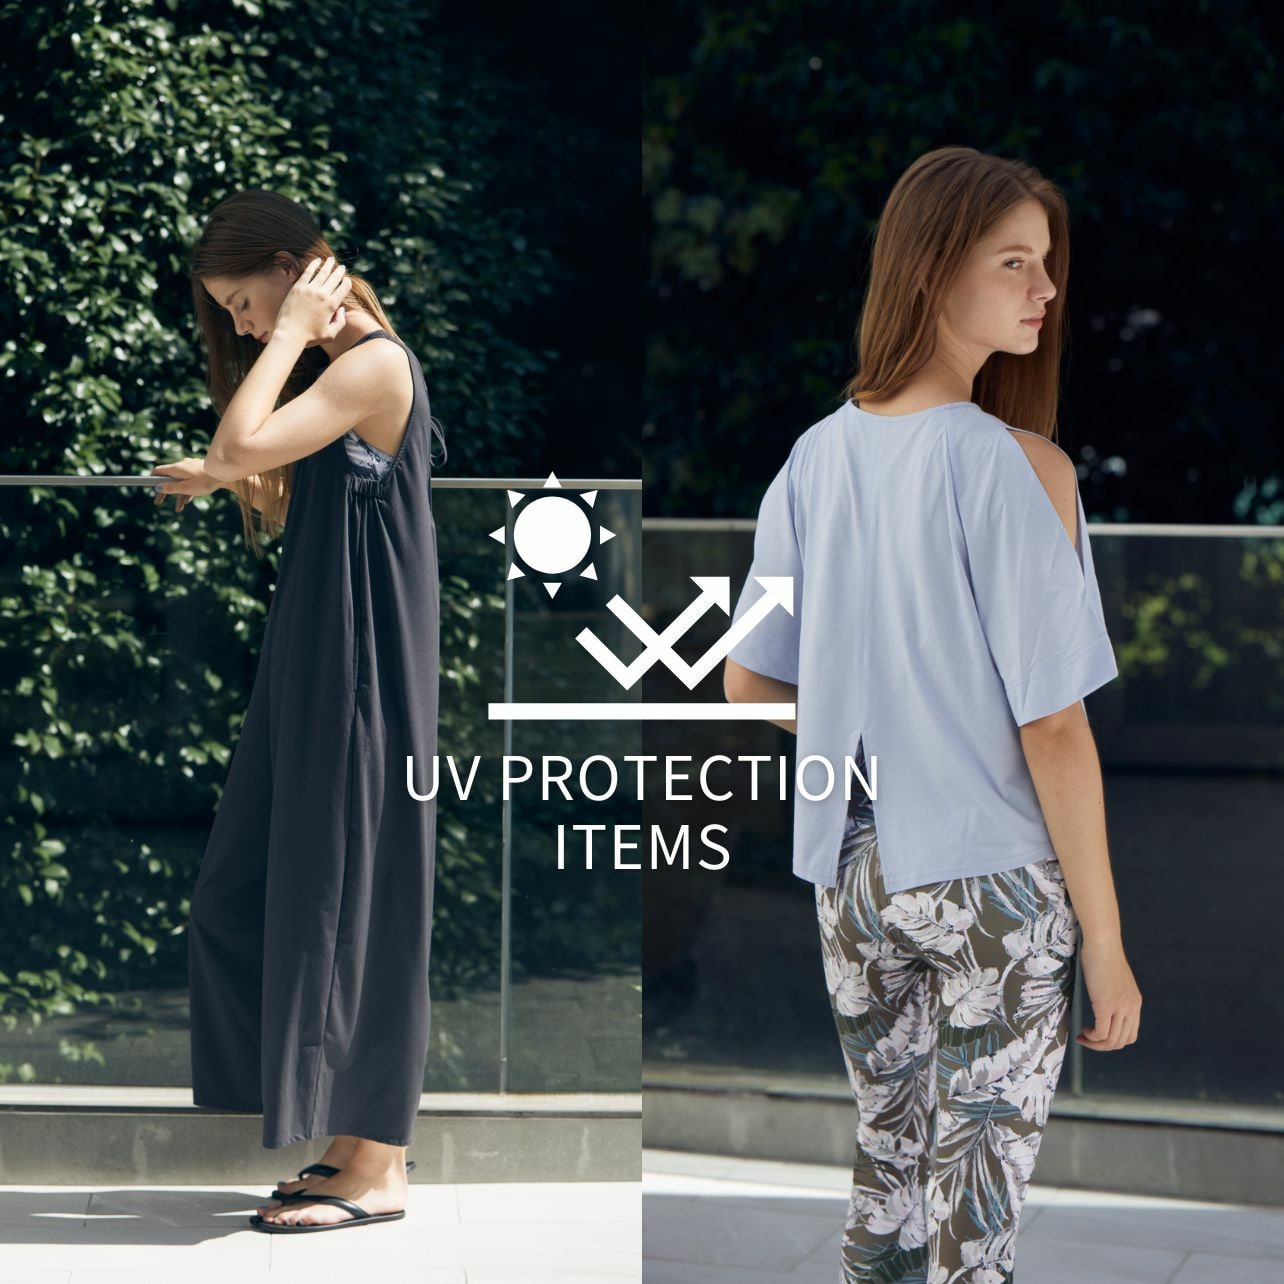 UV PROTECTION ITEMS